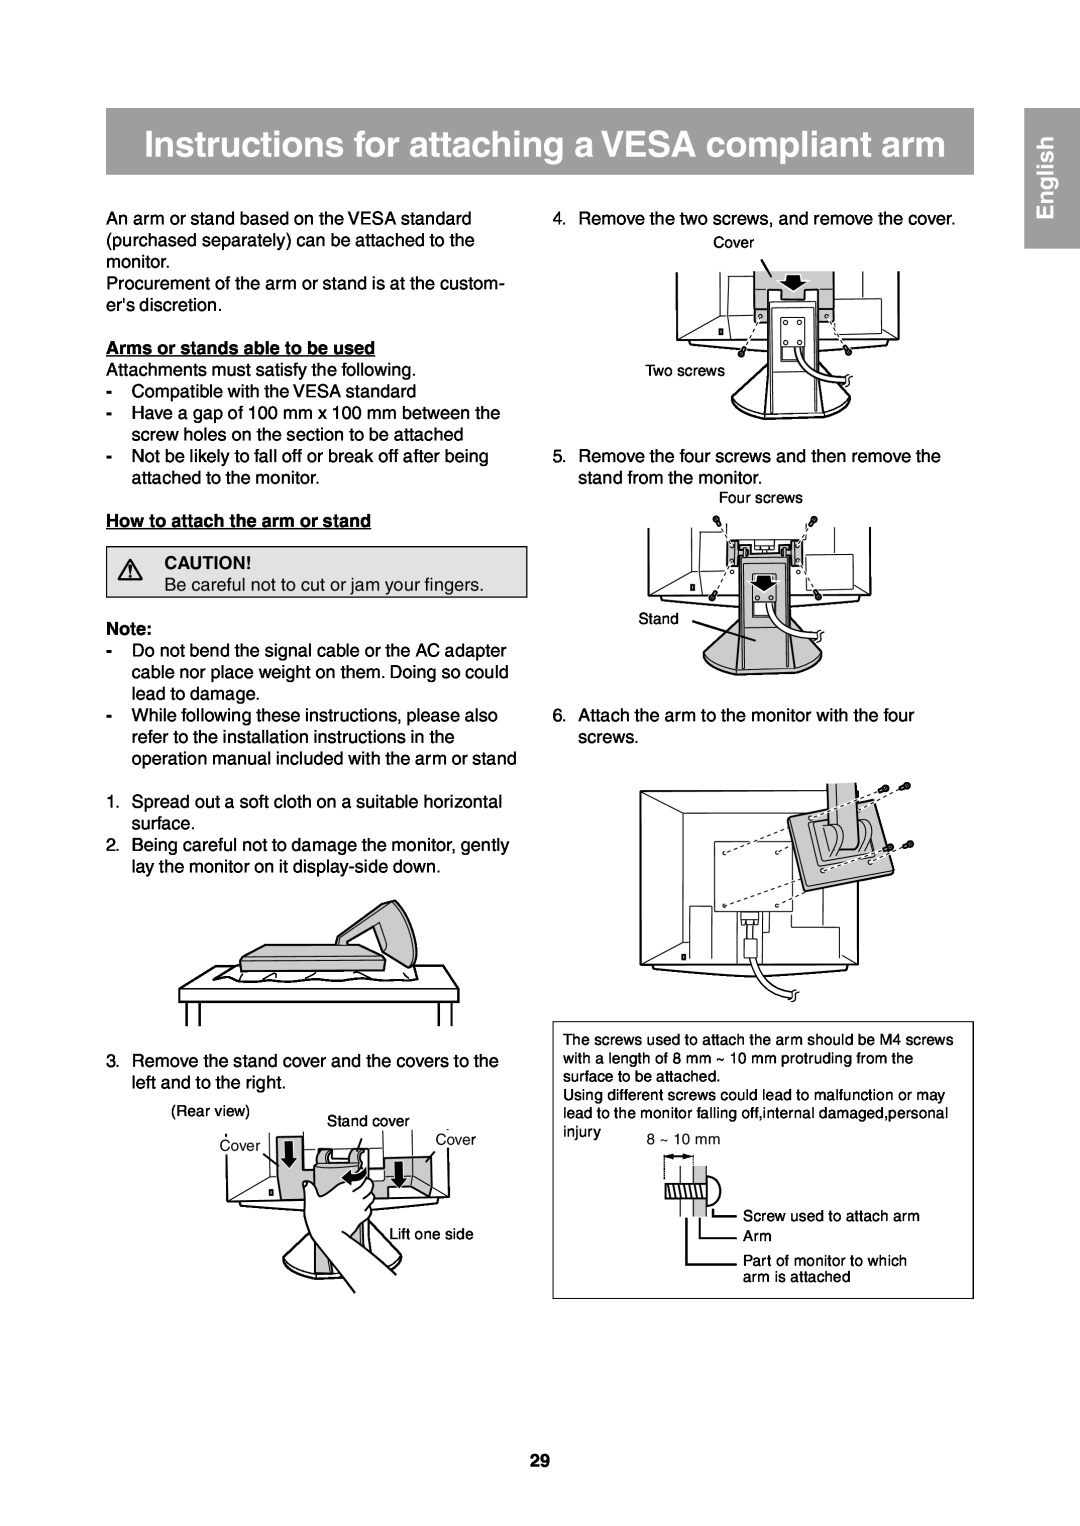 Sharp LL-T1811W operation manual Instructions for attaching a VESA compliant arm, How to attach the arm or stand, English 